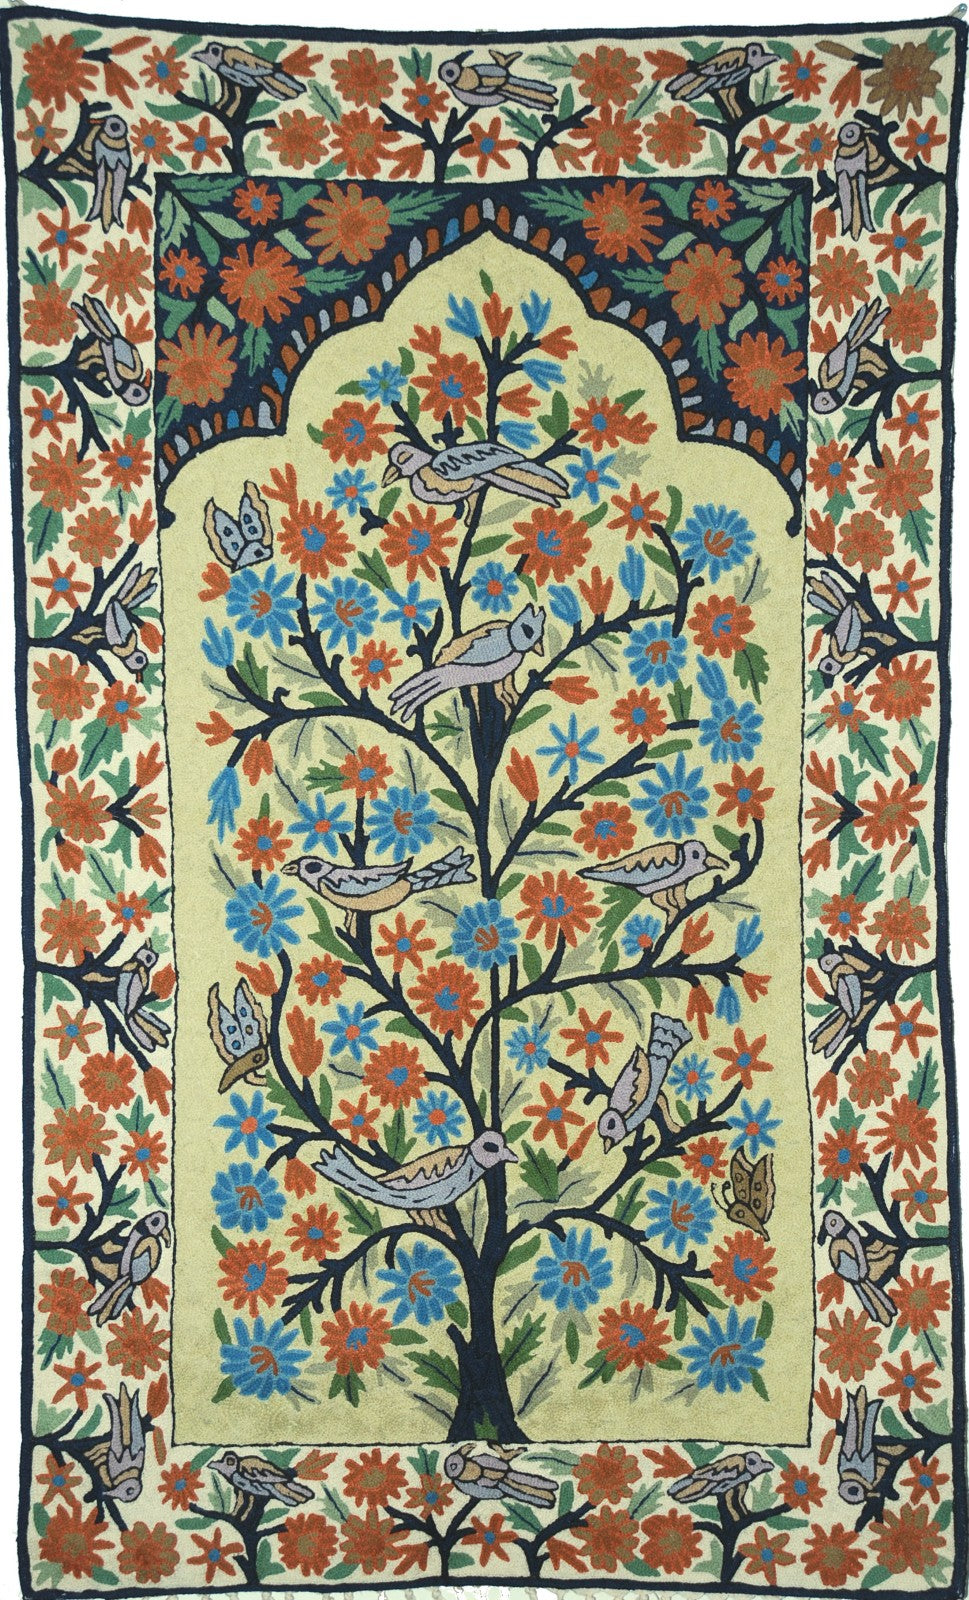 Kashmiri Wool Tapestry  Area Rug "Tree of Life Birds", Multicolor Embroidery 3x5 feet #CWR15124